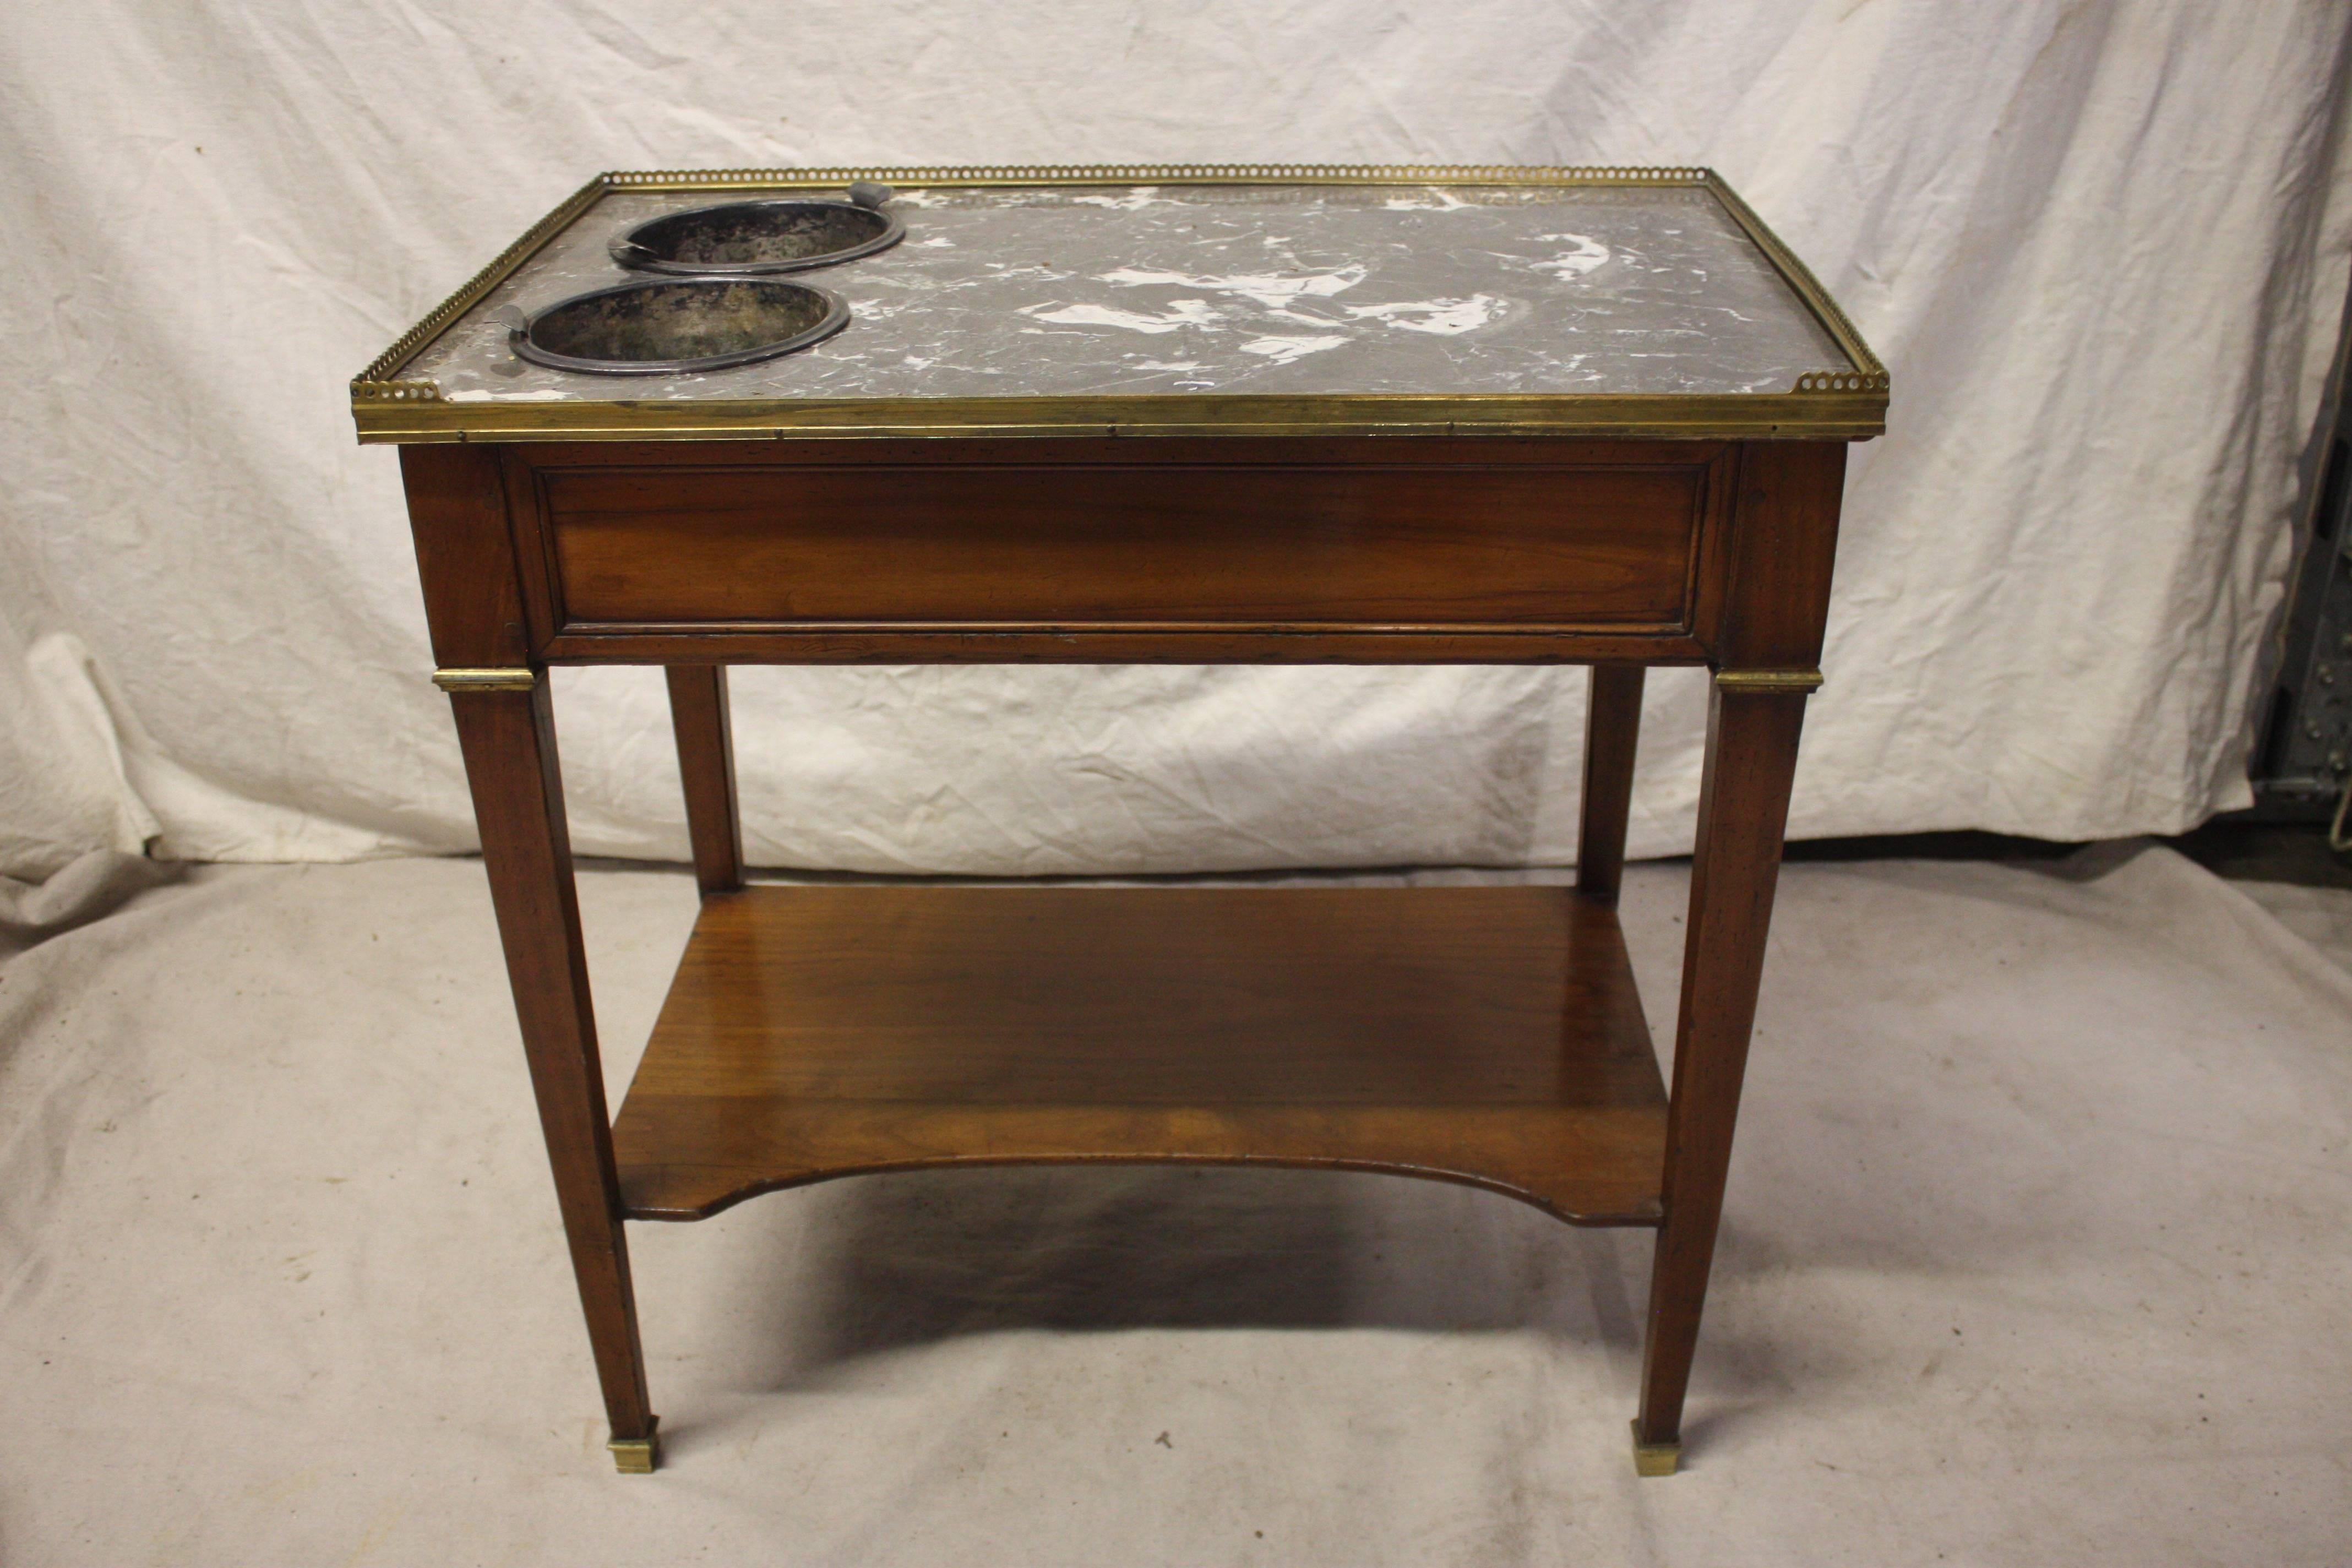 Beautiful 19th century French side table called 